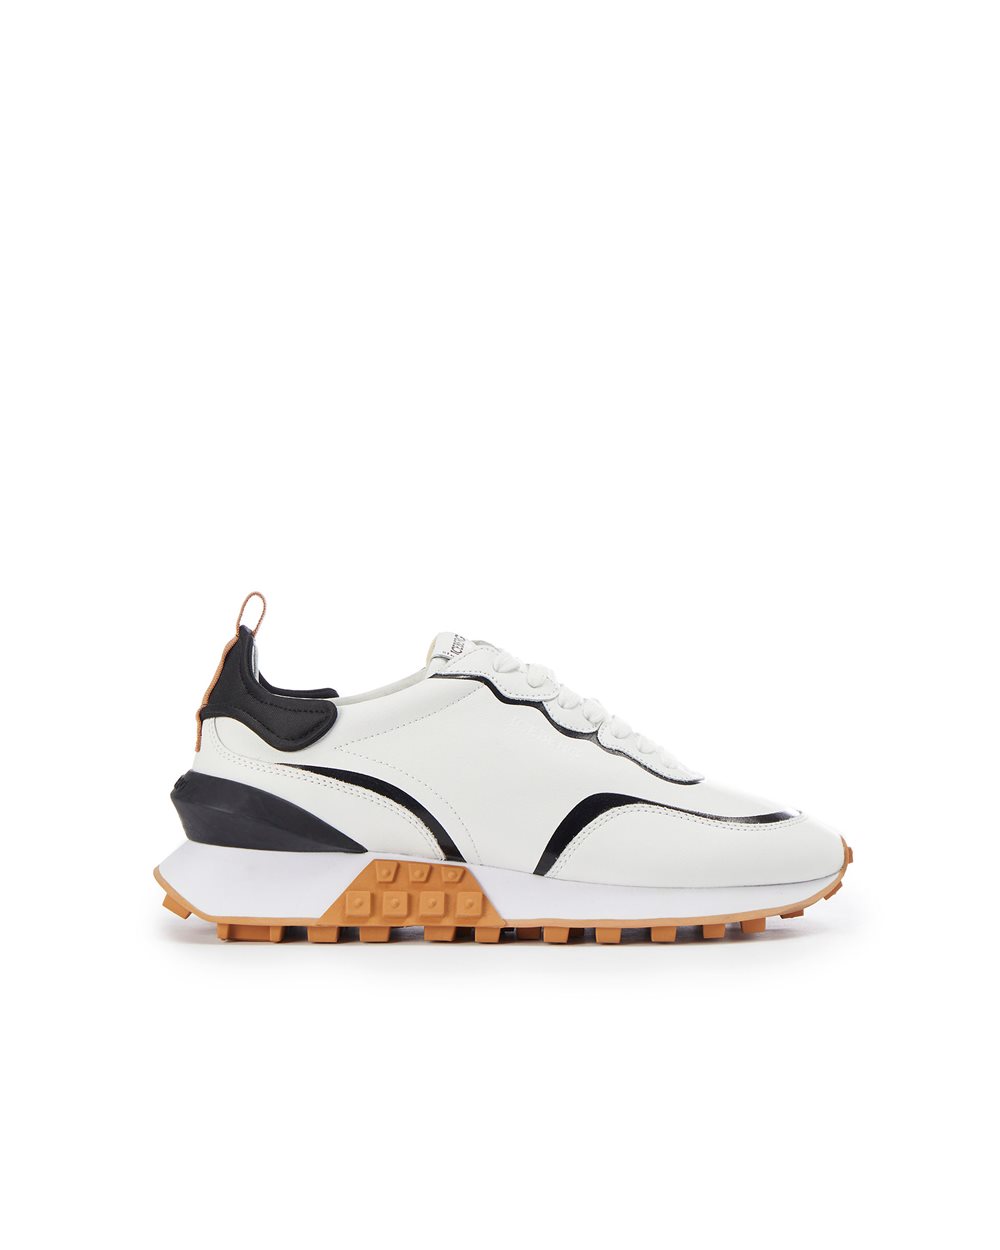 Hyper two-tone sneakers - ( PRIMO STEP US ) PROMO SALDI UP TO 30%  | Iceberg - Official Website